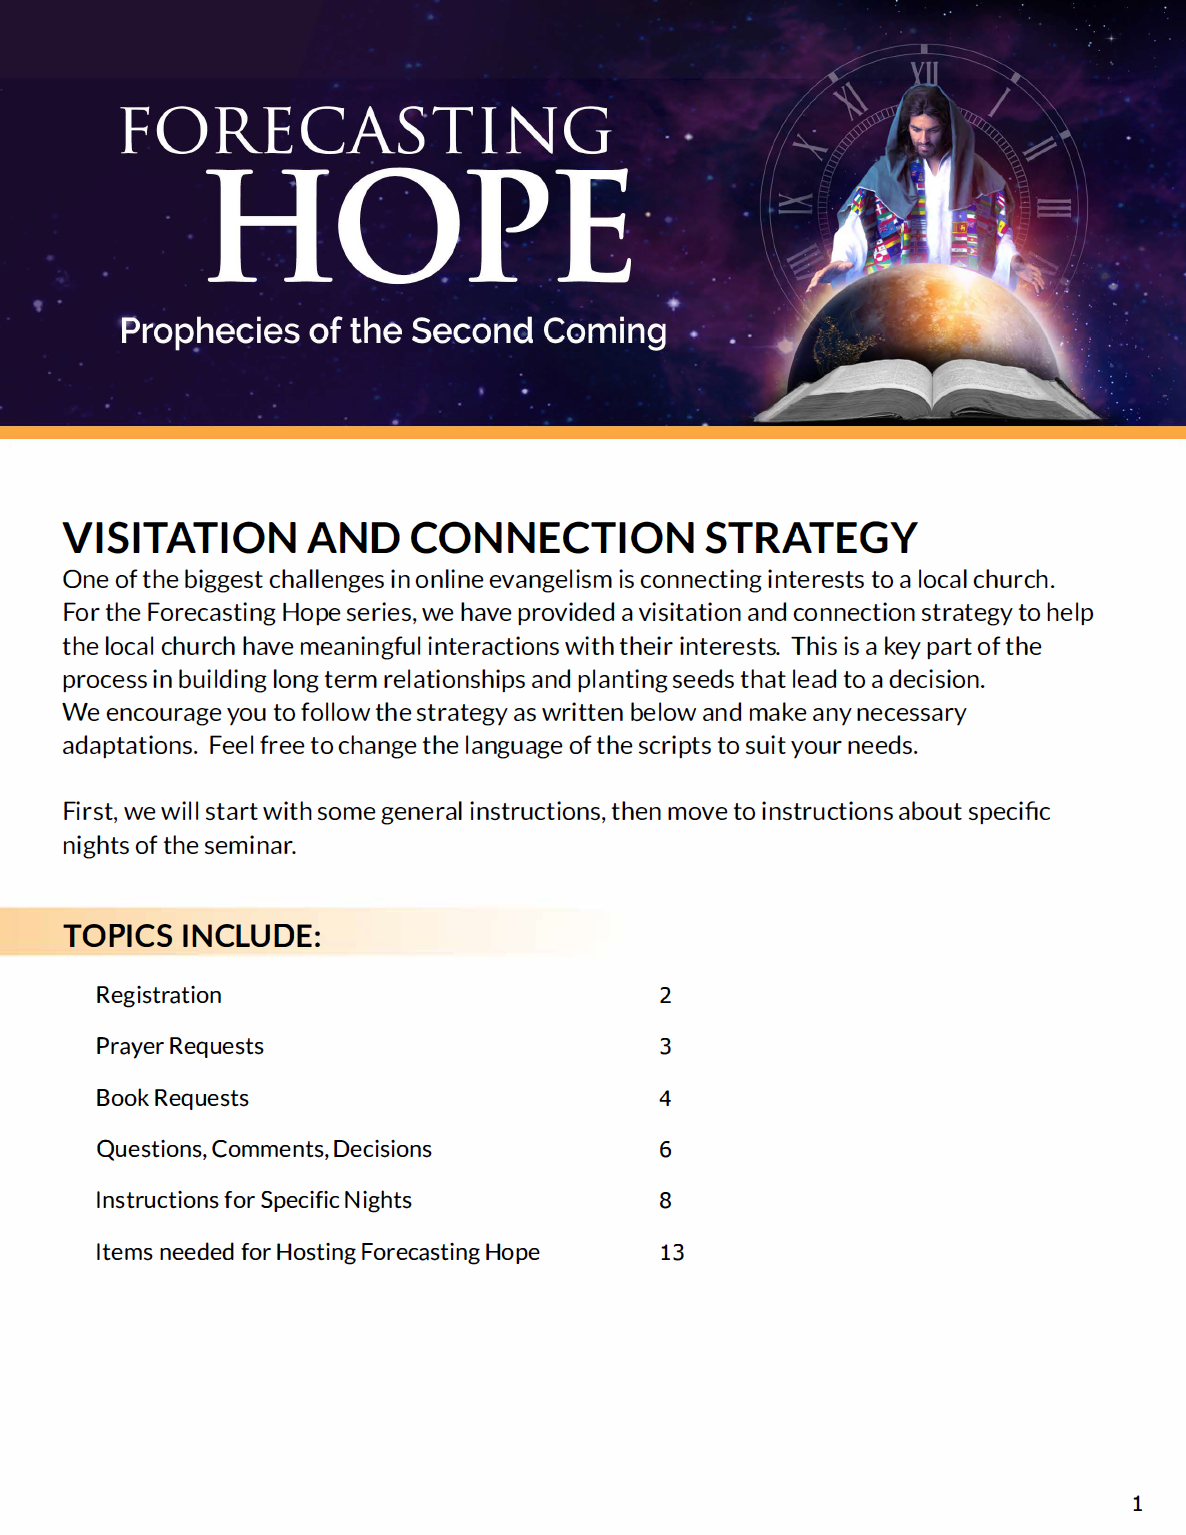 Visitation and Strategy Guide